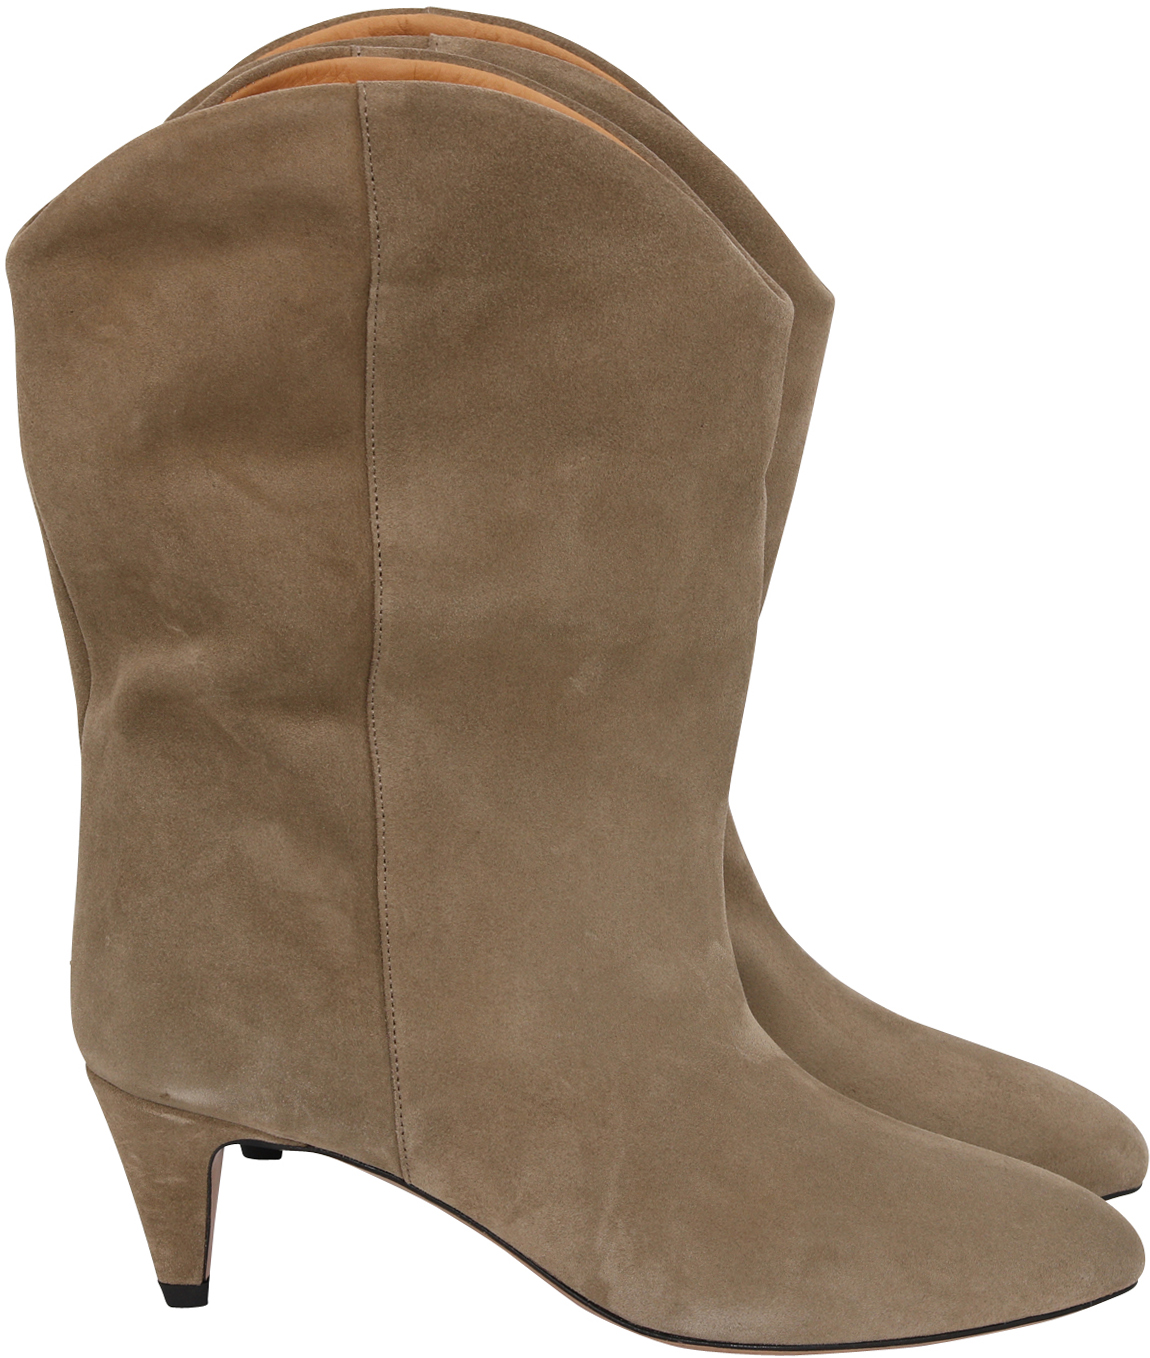 Isabel Marant High Boots Dernee Taupe Suede 41